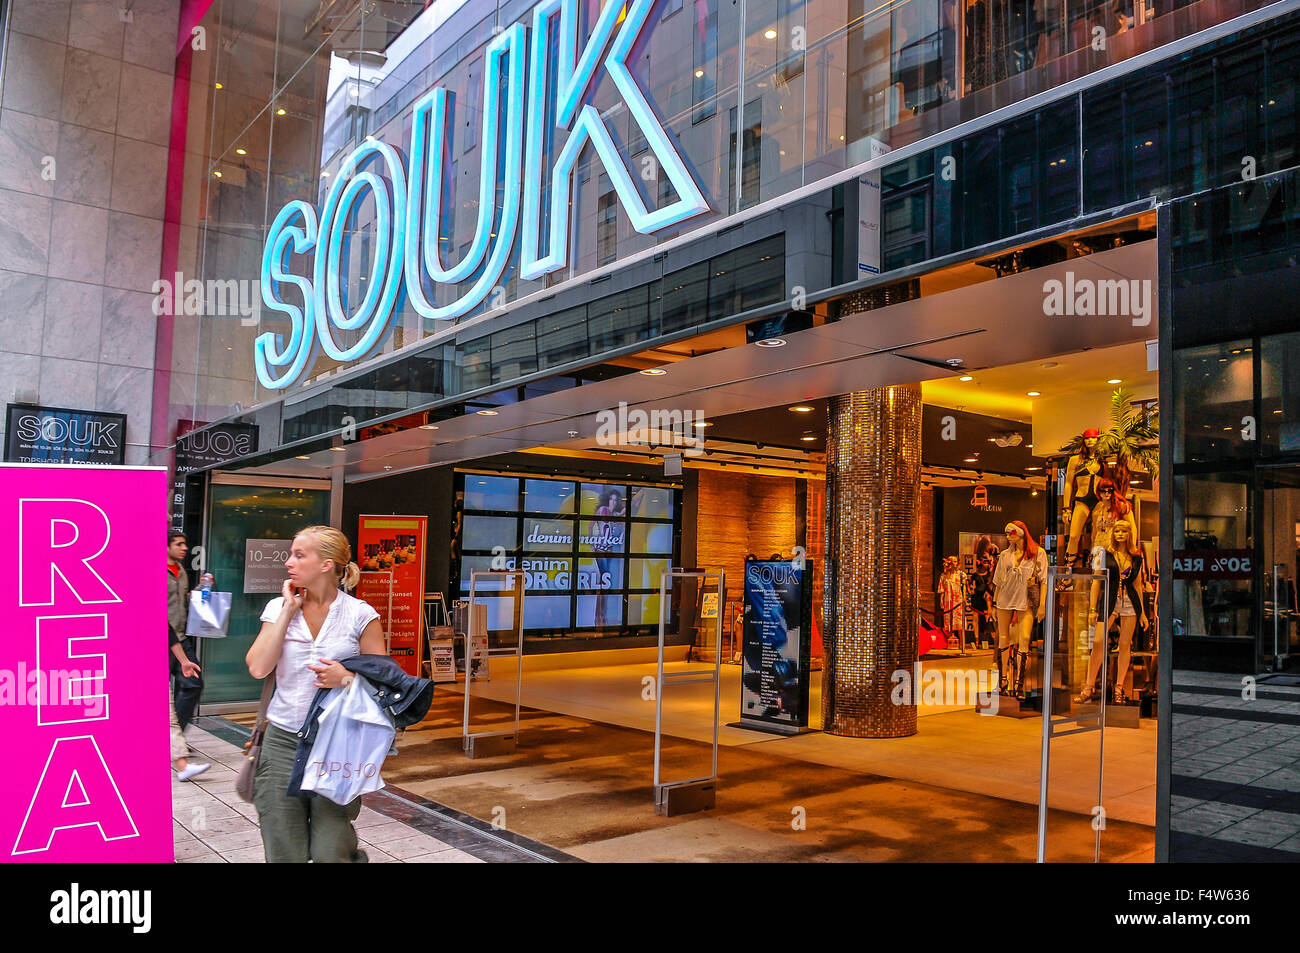 Page 3 - Stockholm Shopping High Resolution Stock Photography and Images -  Alamy